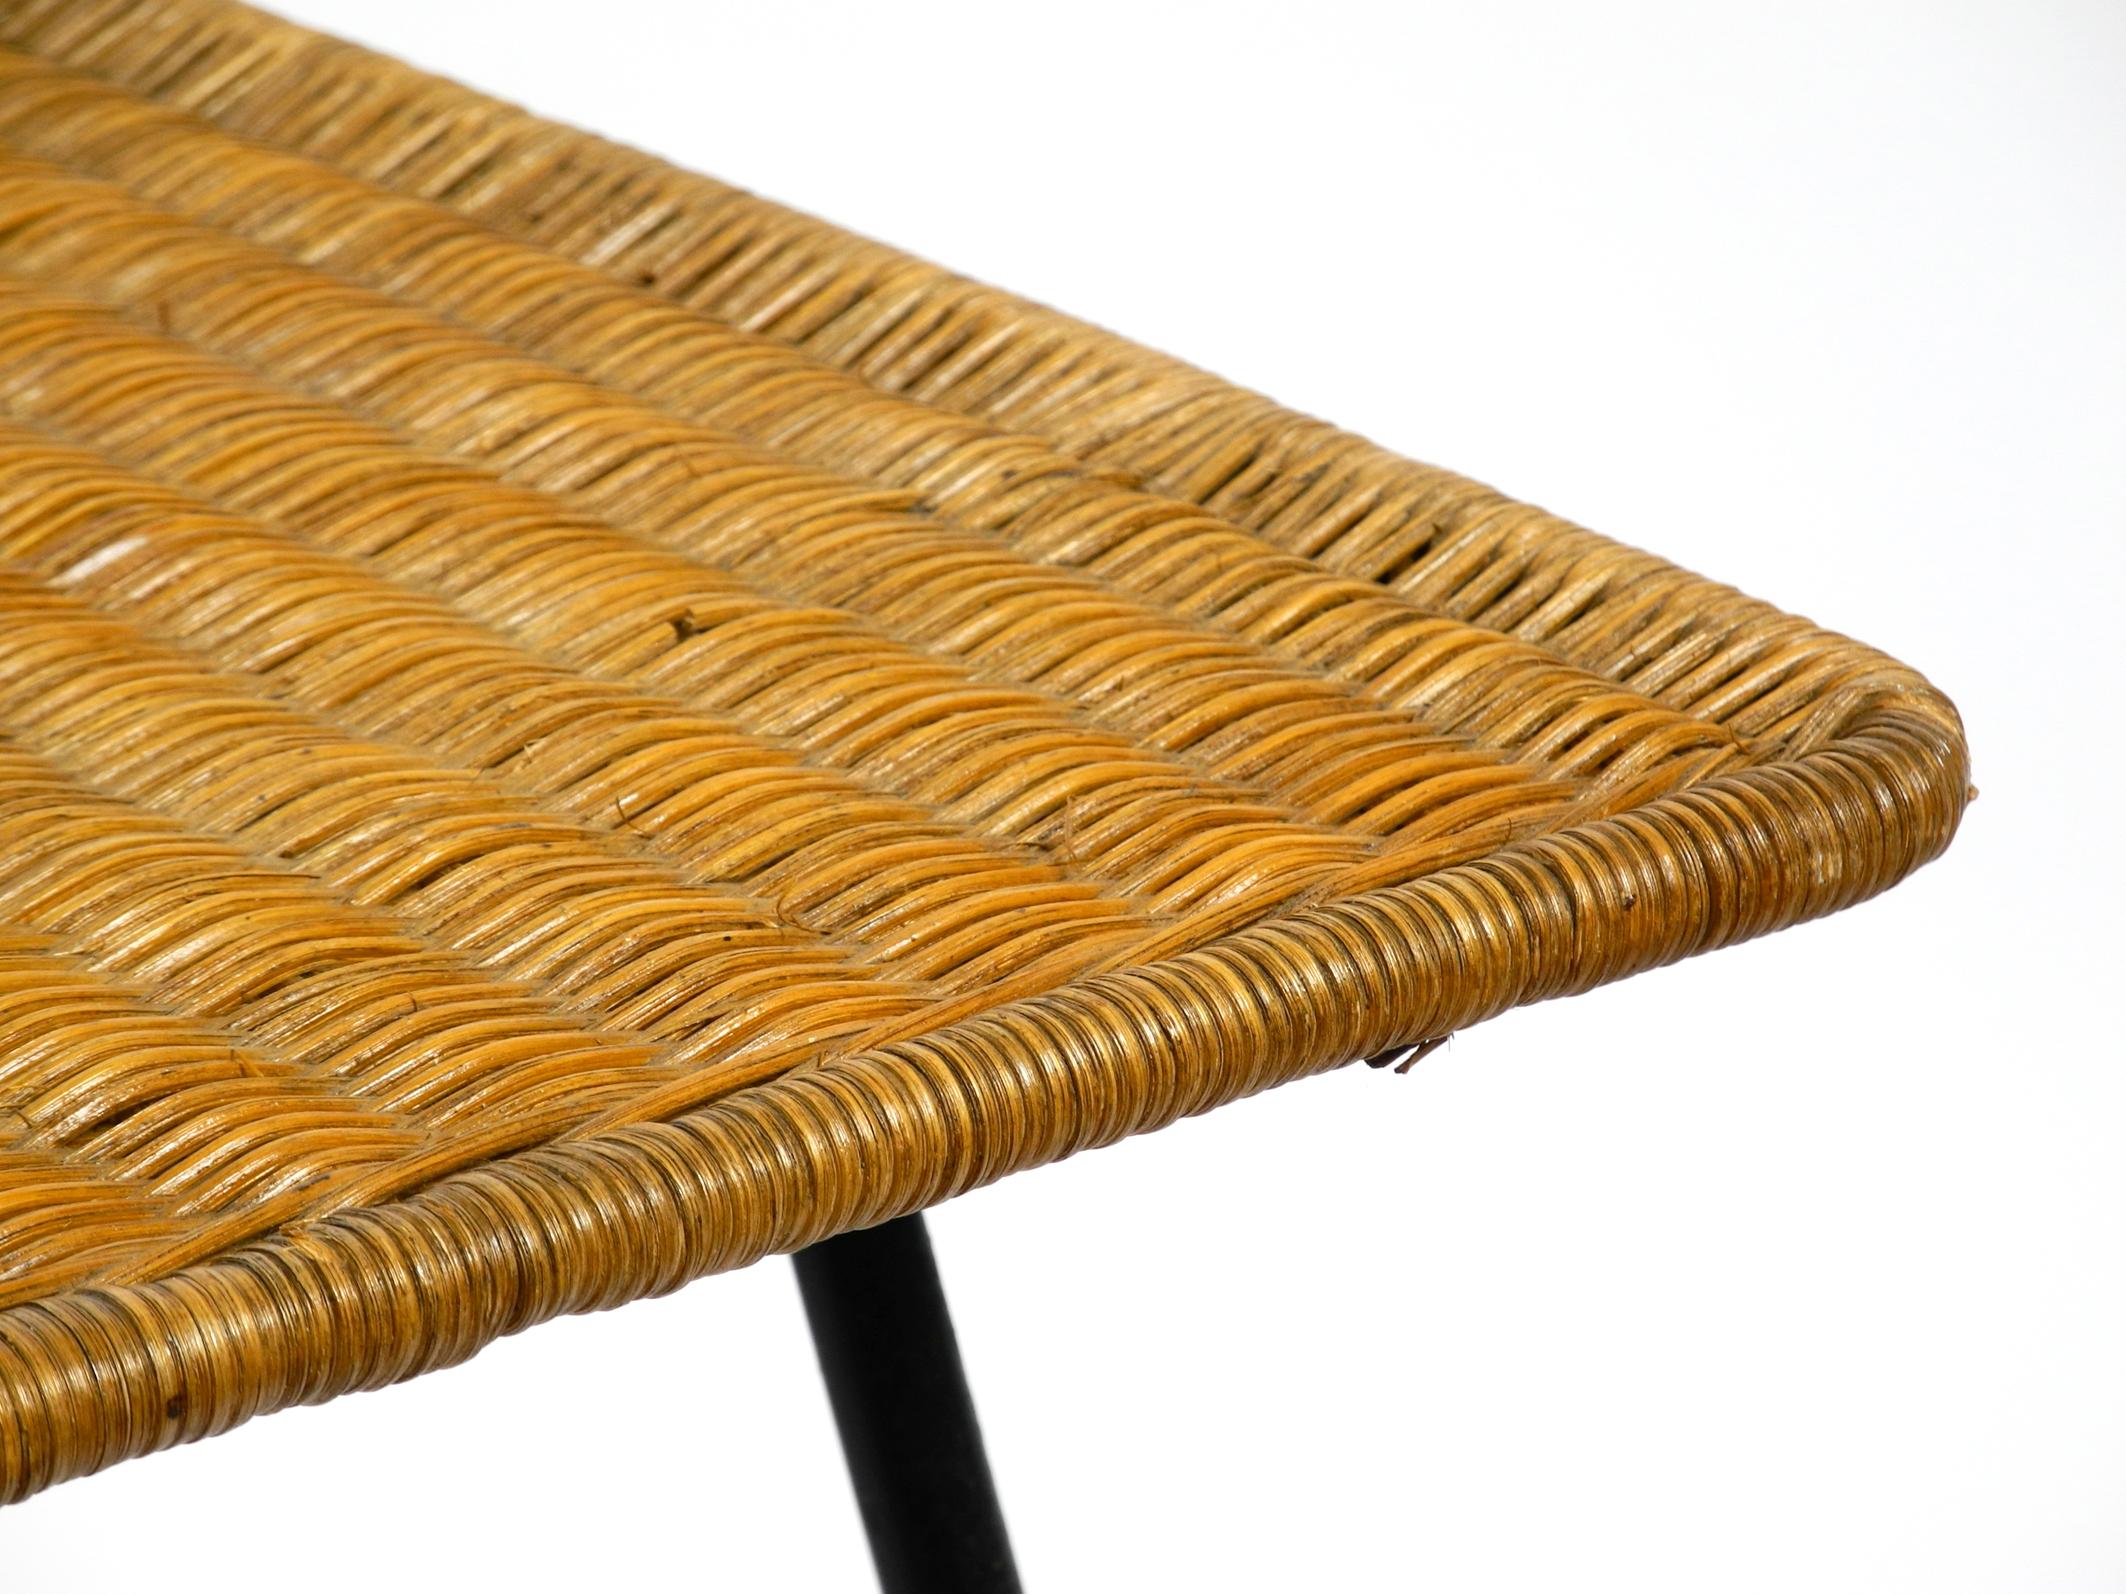 Italian Mid-Century Modern Rattan Side or Coffee Table with a Heavy Iron Frame For Sale 3